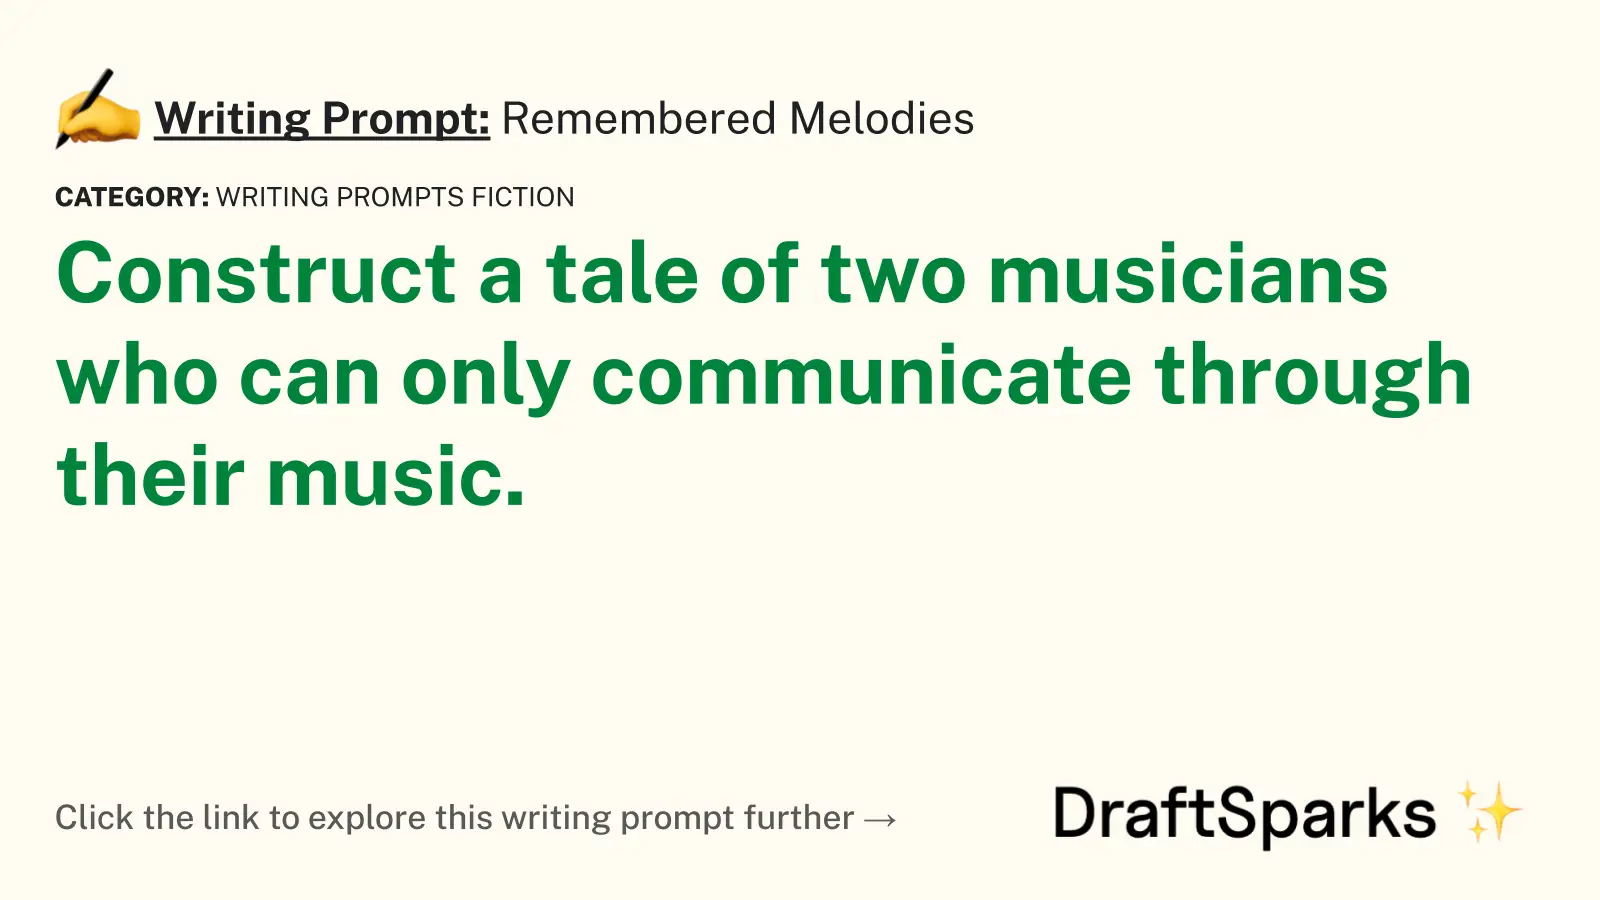 Remembered Melodies